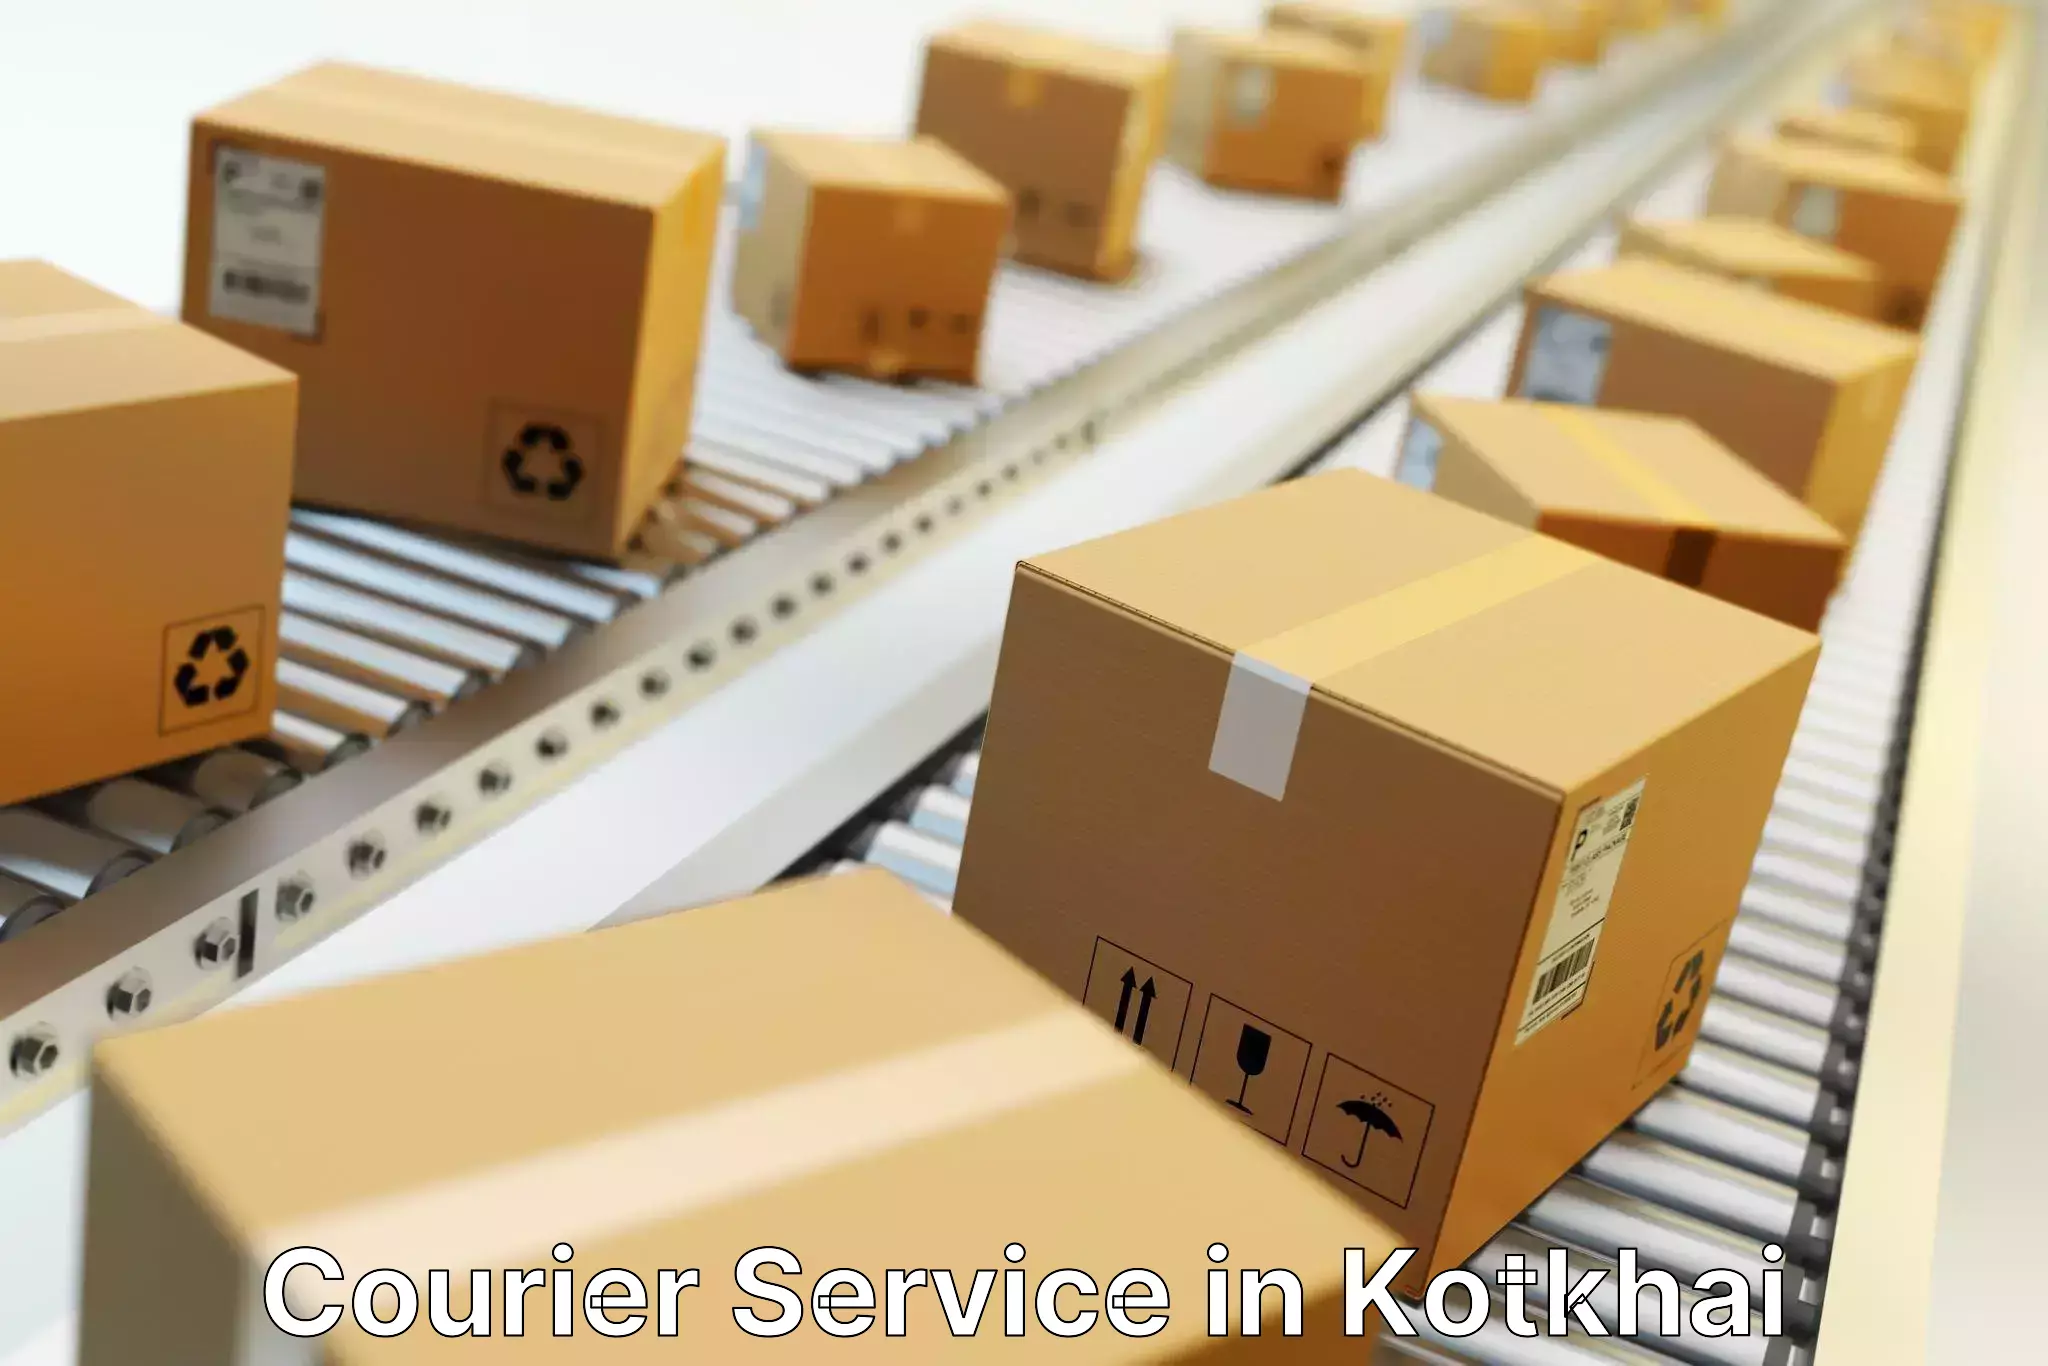 Cost-effective shipping solutions in Kotkhai